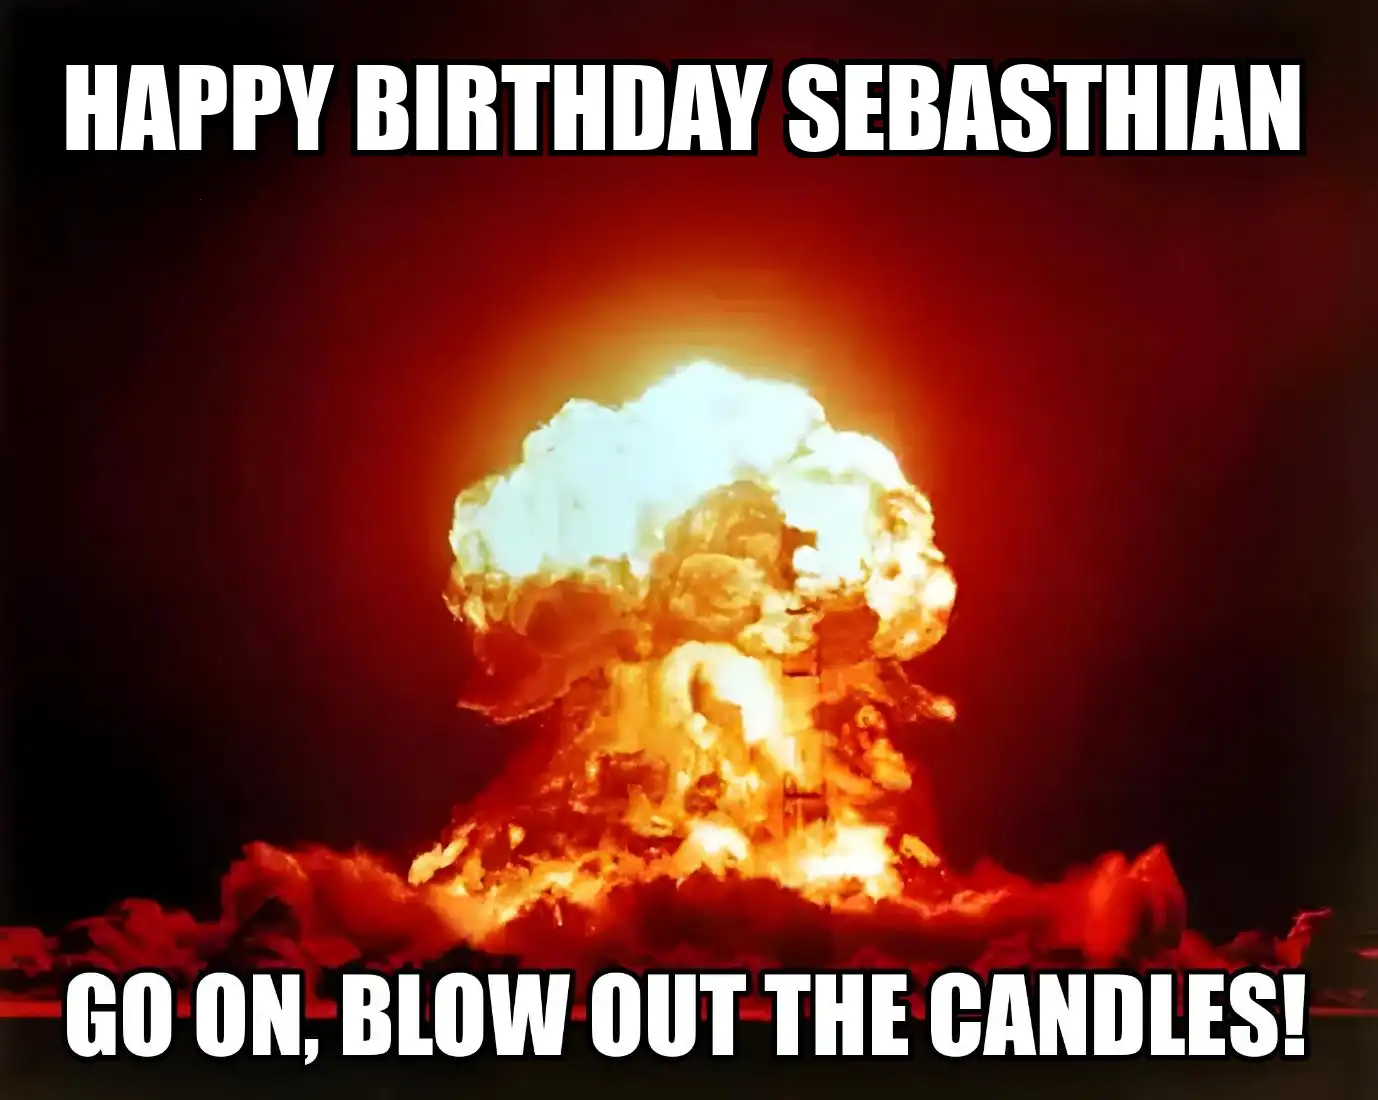 Happy Birthday Sebasthian Go On Blow Out The Candles Meme